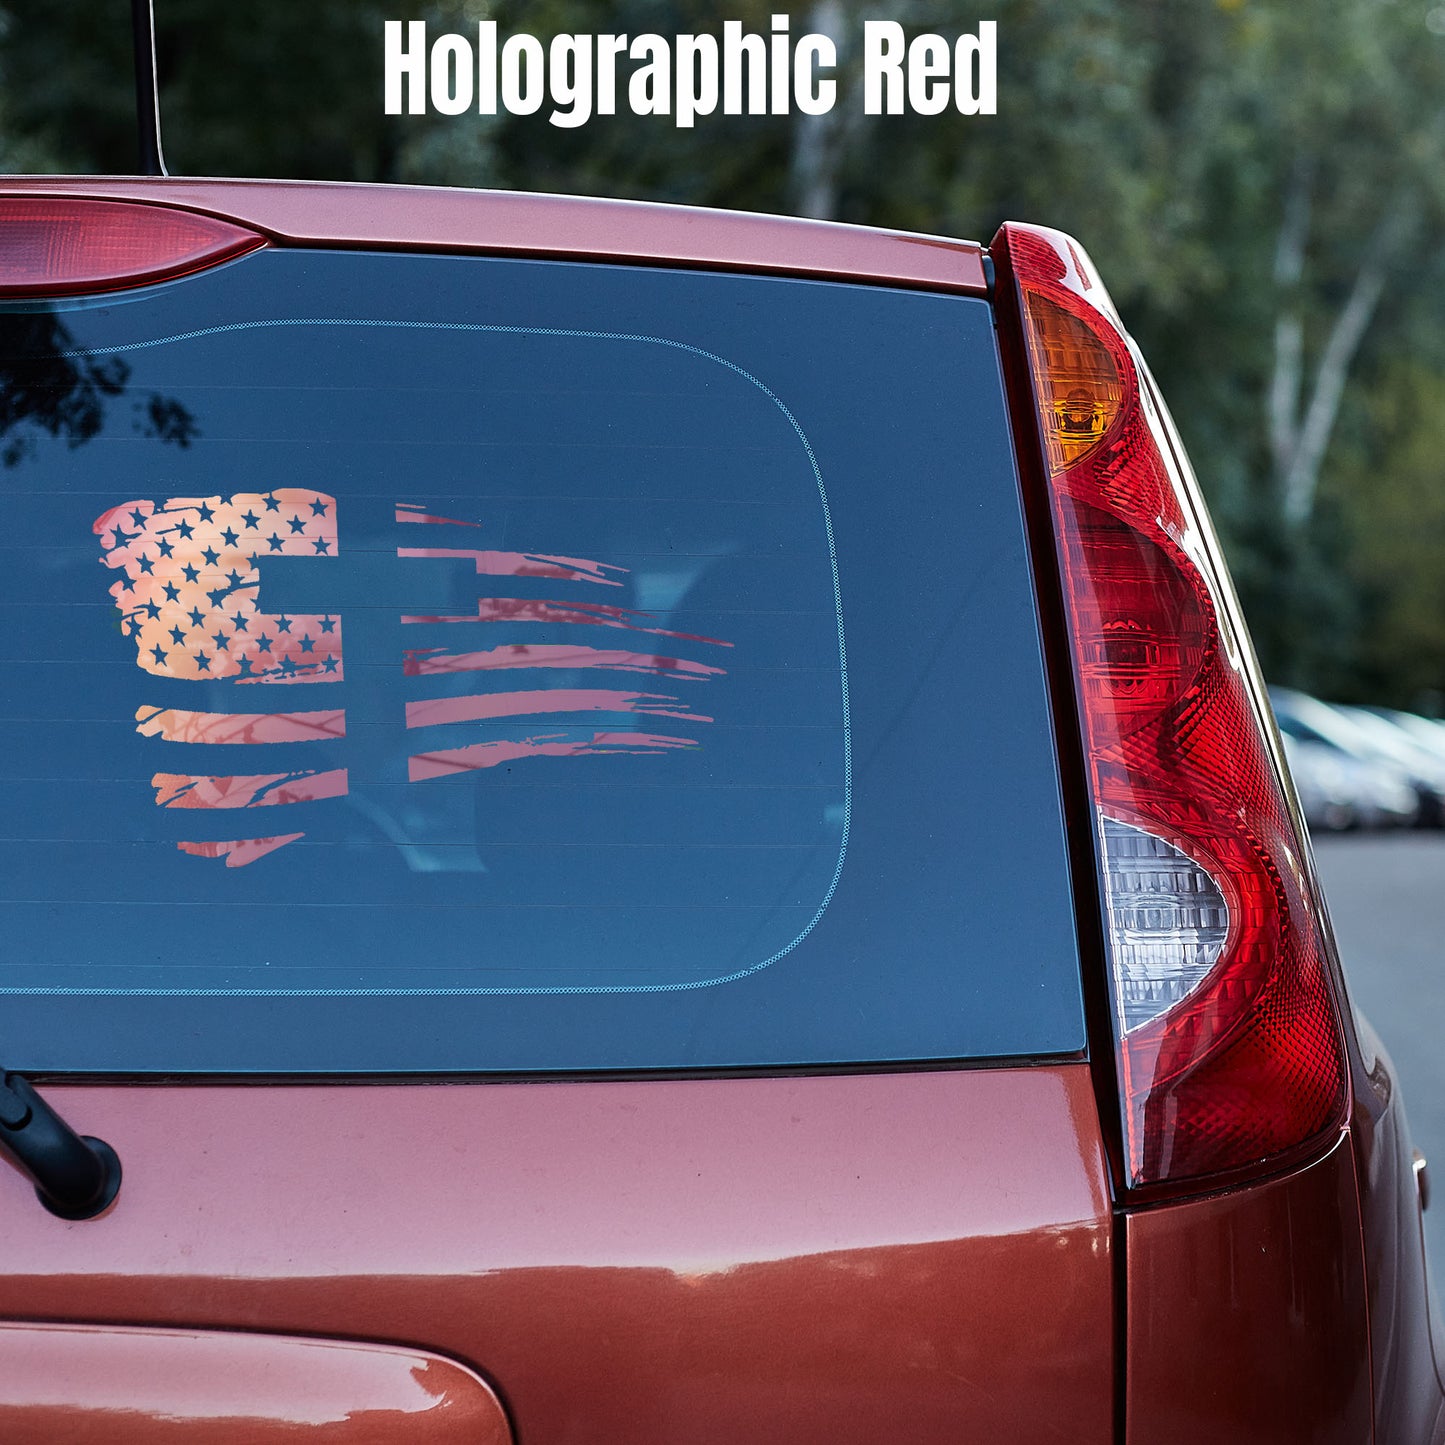 US Flag with cross- Vinyl decal boss gift car decor car lovers dads day gift gift for dad gift for grandpa gift for her gift for him gift for husband gift for mom gift for sister gift for wife liberty moms gift screw around and find out Unique gift Vinyl Vinyl decals vinyl sticker Vinyl stickers window decal window sticker